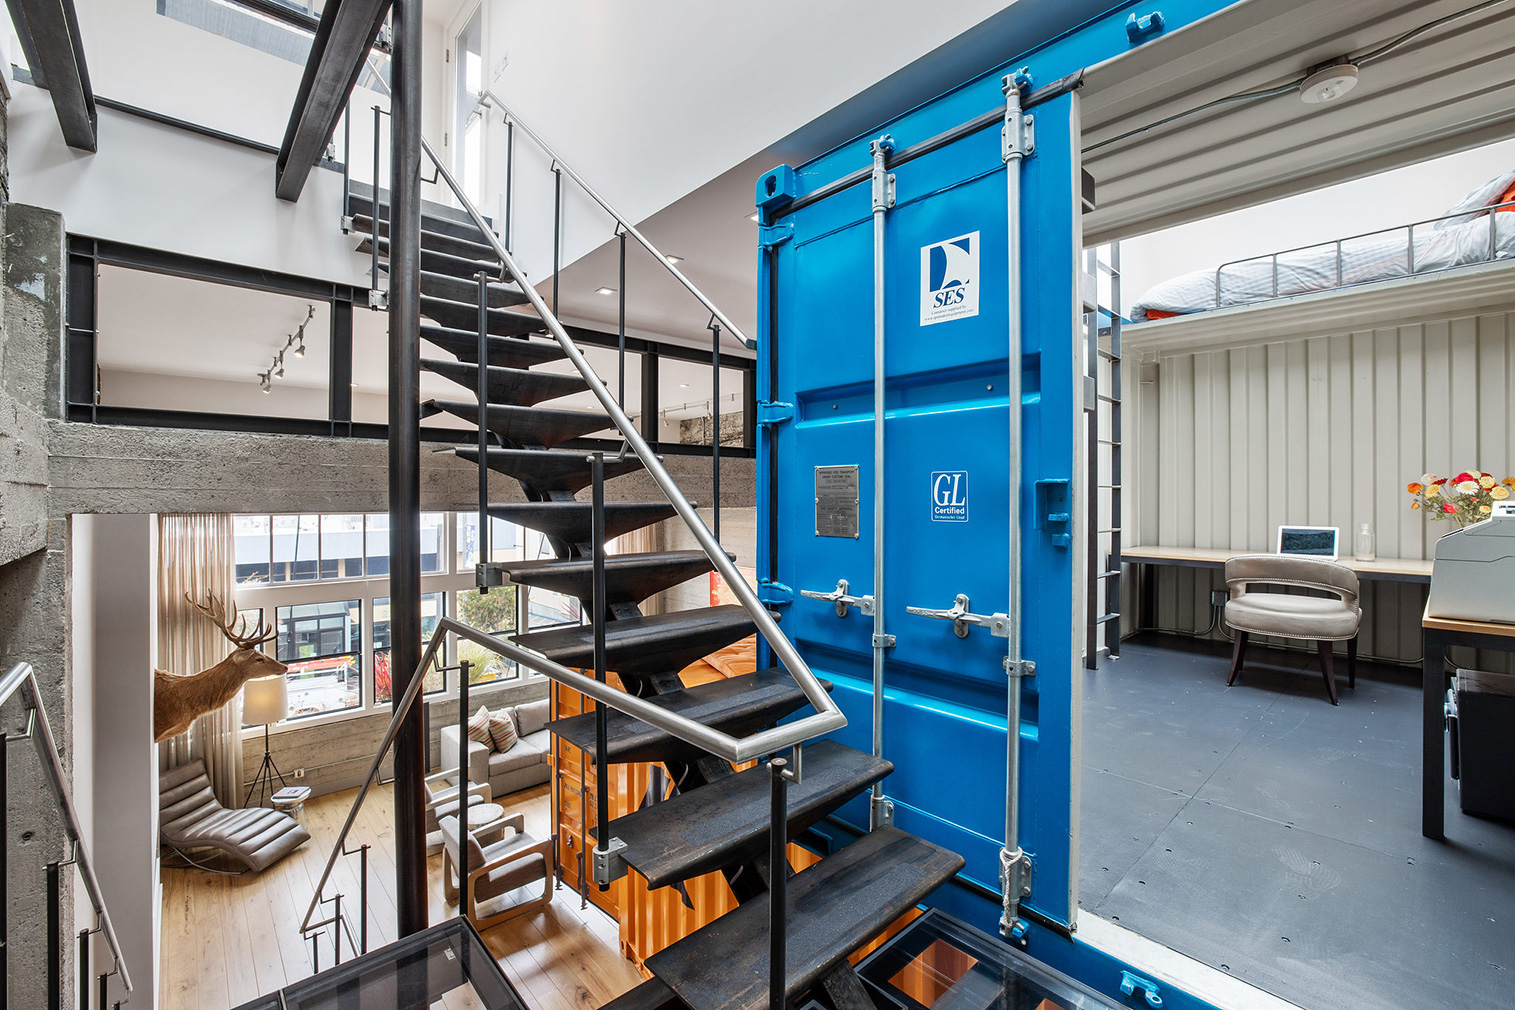 Stacked shipping containers sit inside this sprawling warehouse loft in San Francisco's Fillmore District, juxtaposing industrial brick bones with rugged steel.